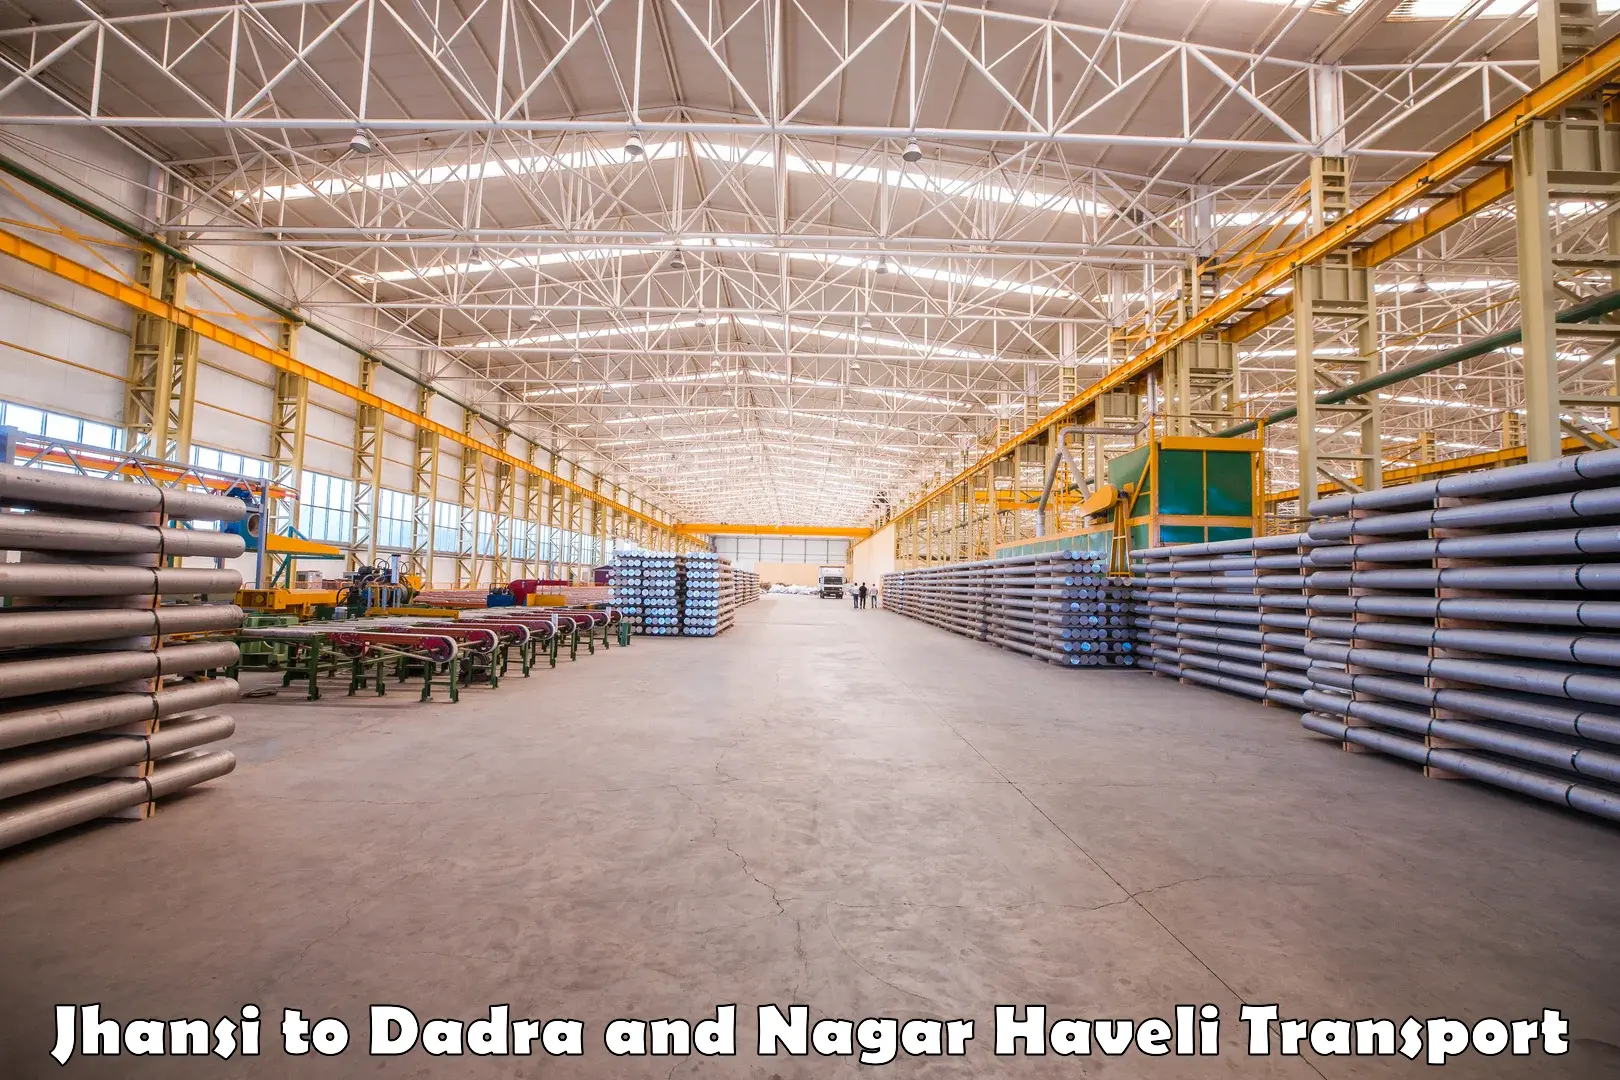 Goods delivery service Jhansi to Dadra and Nagar Haveli